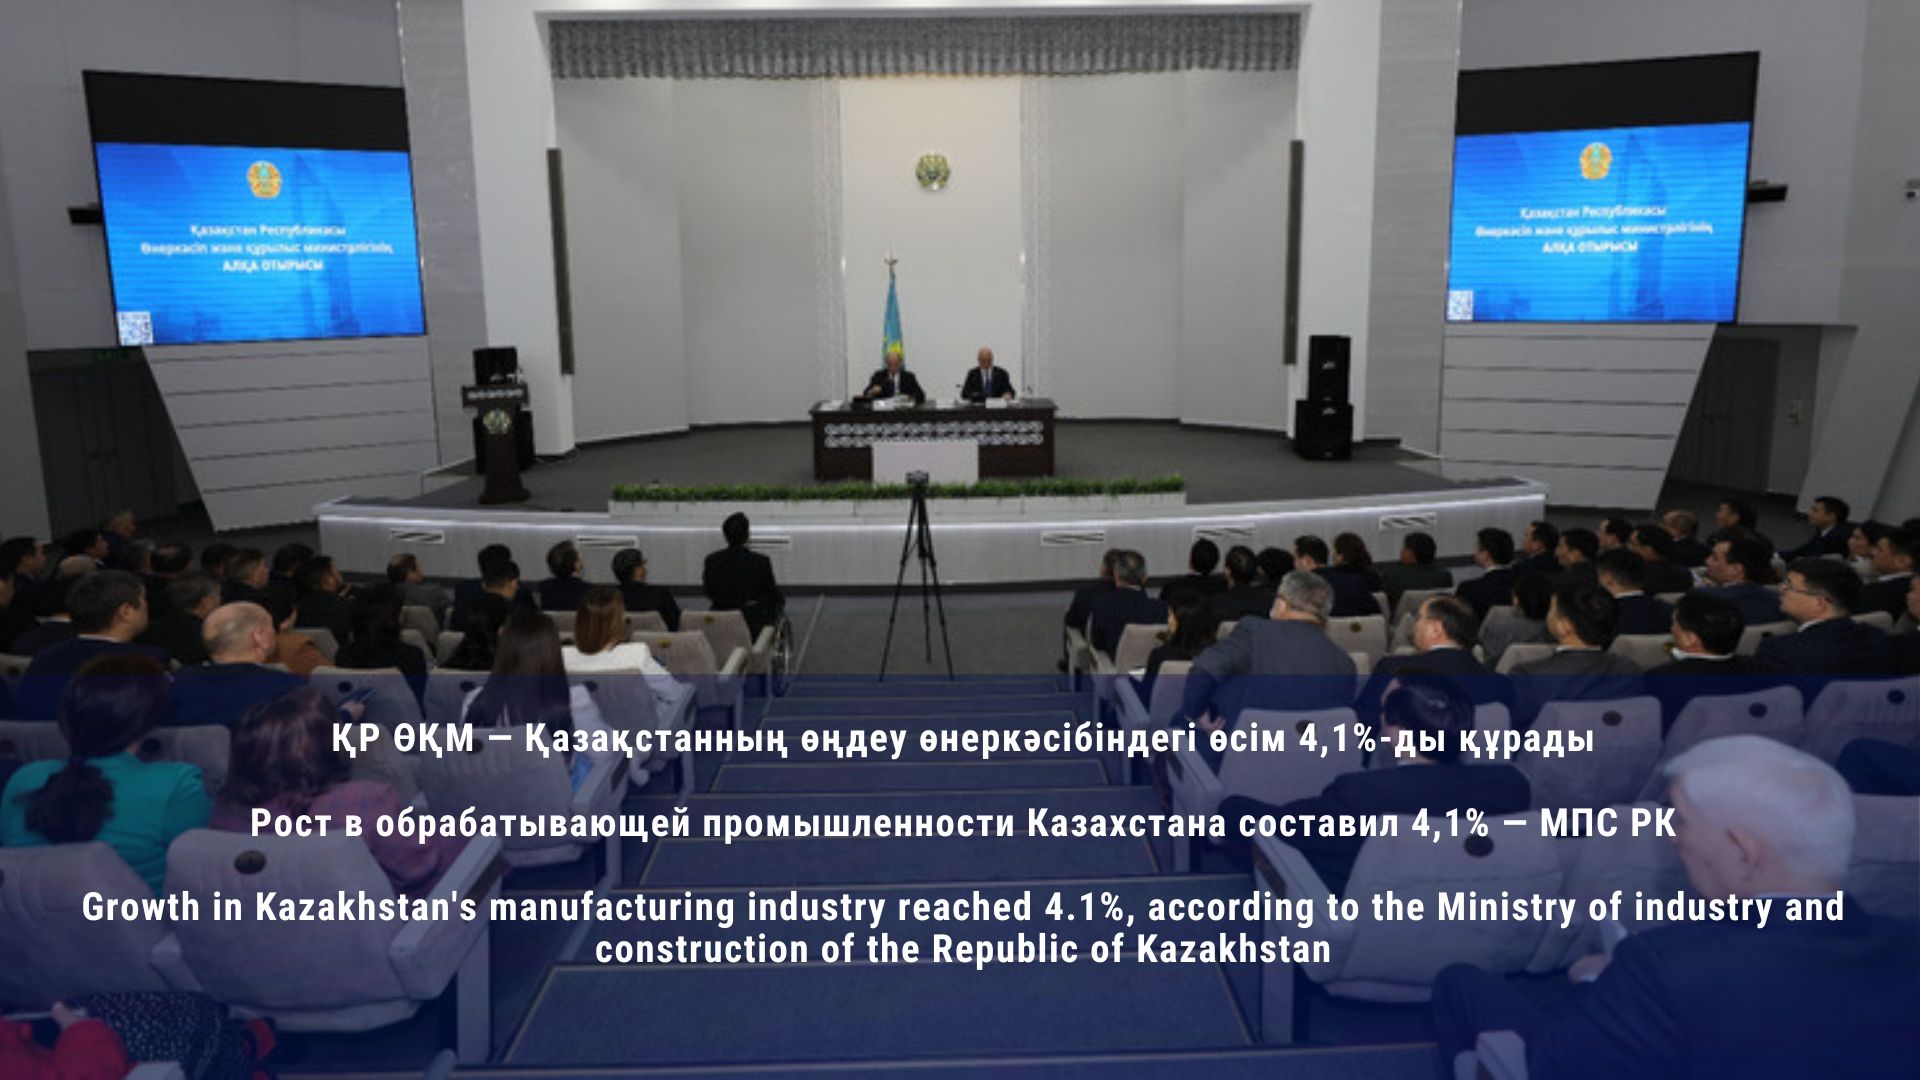 Growth in Kazakhstan's manufacturing industry reached 4.1%, according to the Ministry of industry and construction of the Republic of Kazakhstan